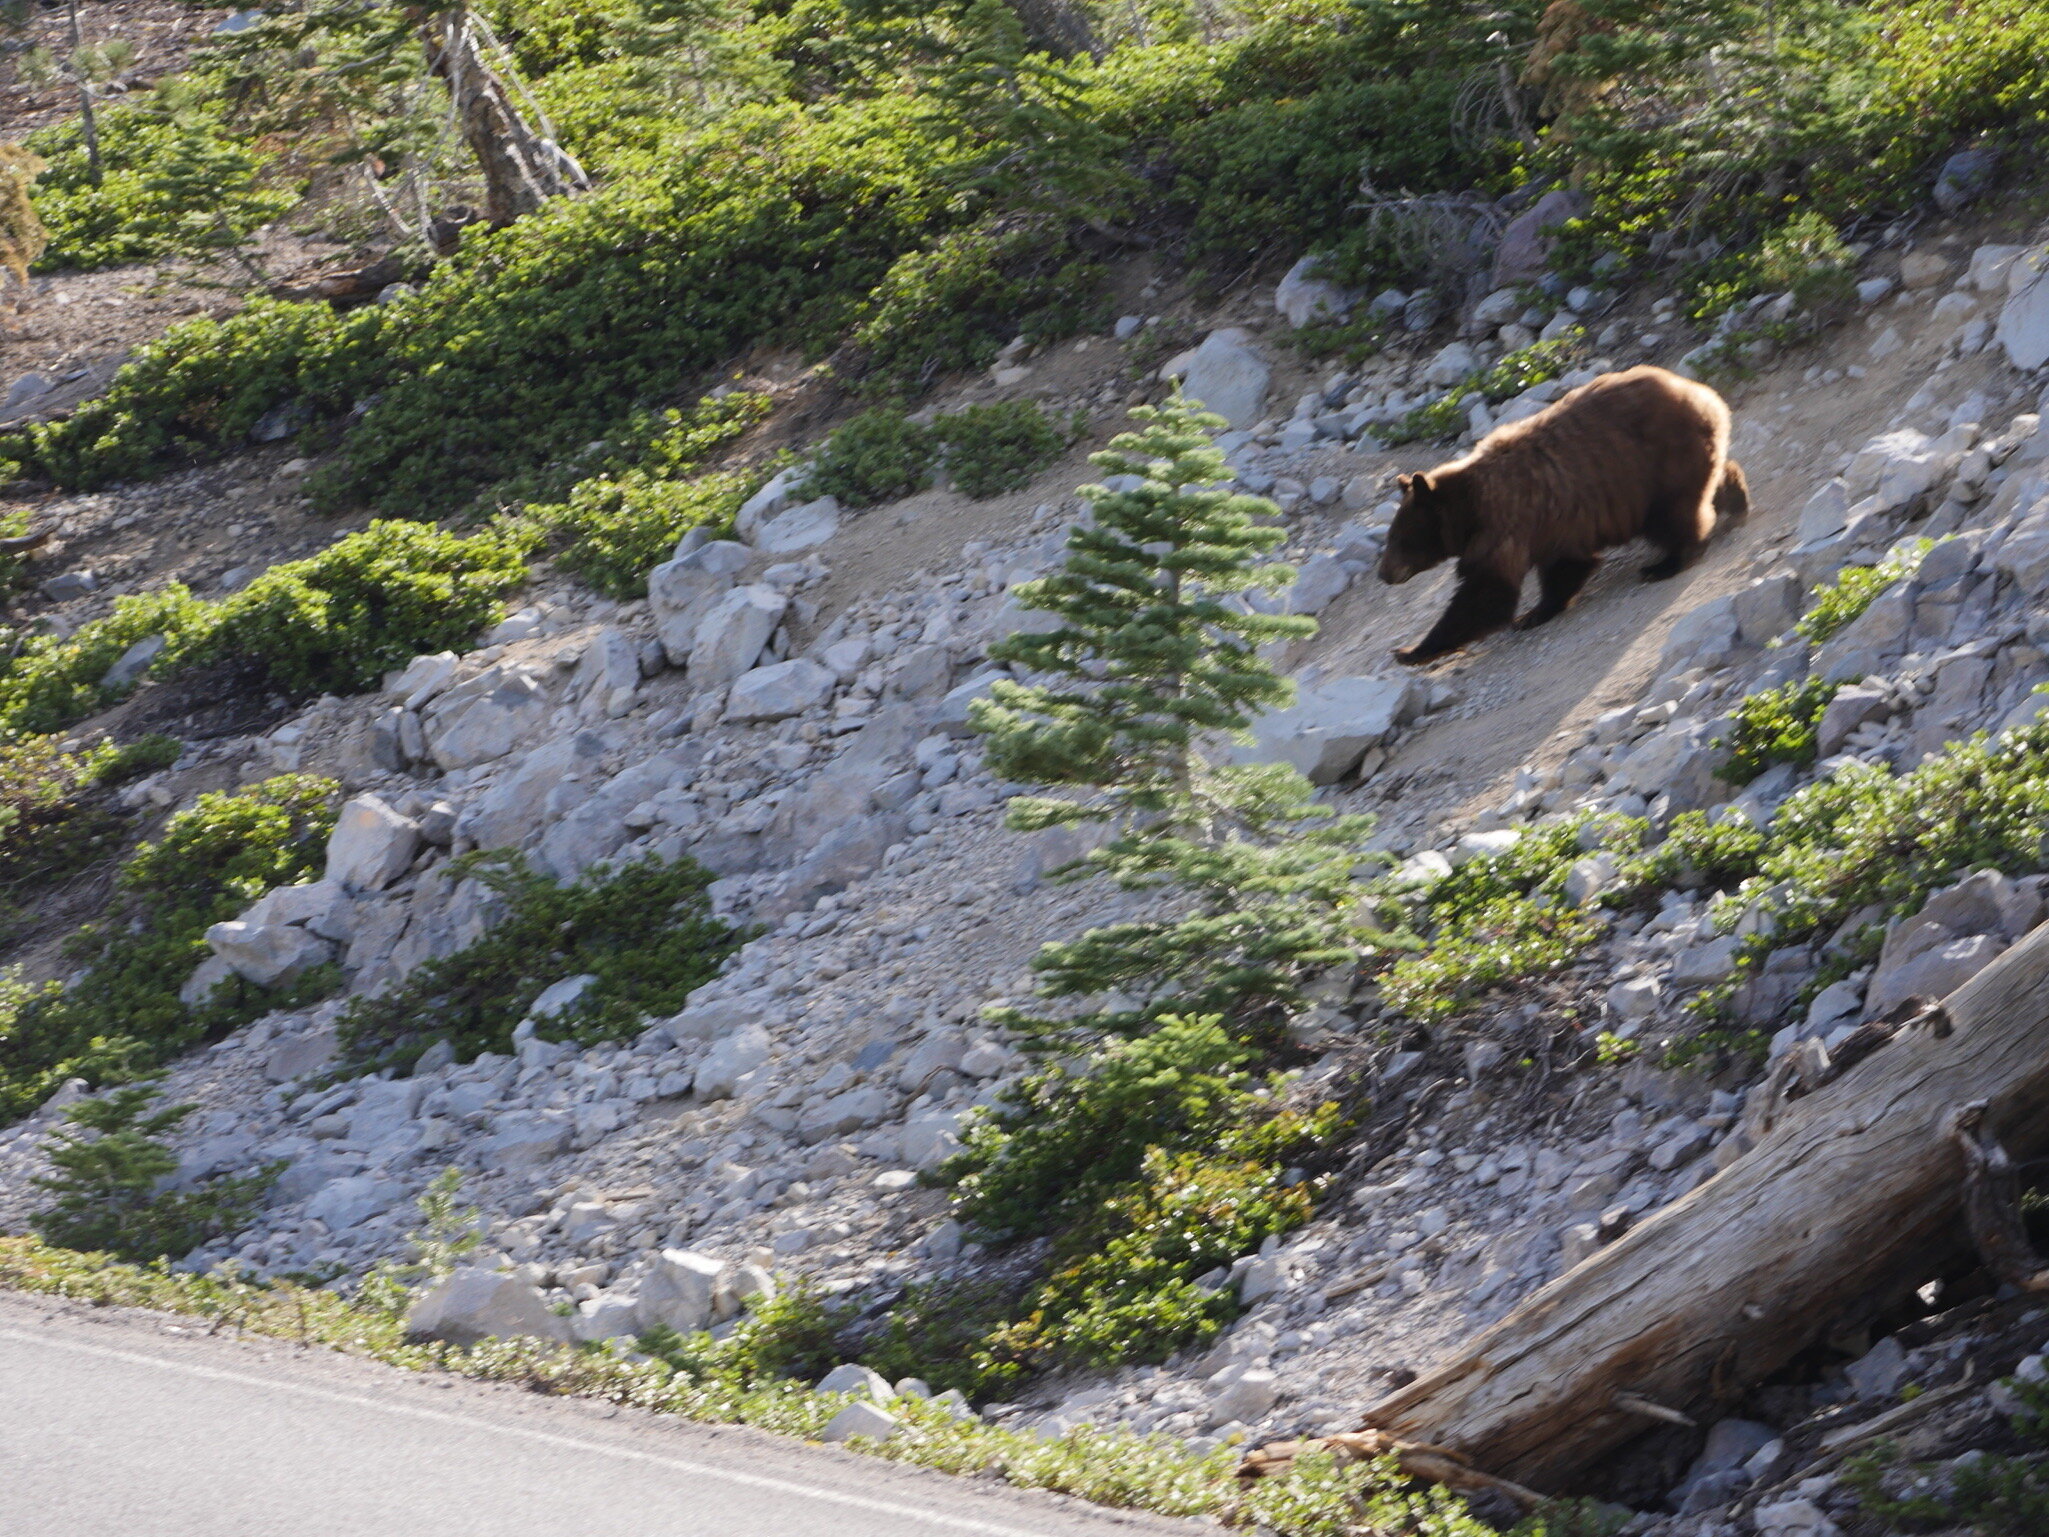 Photo 5 - Bear coming down slope to cross road.  Photo by Jude Boudreaux, 6/5/21